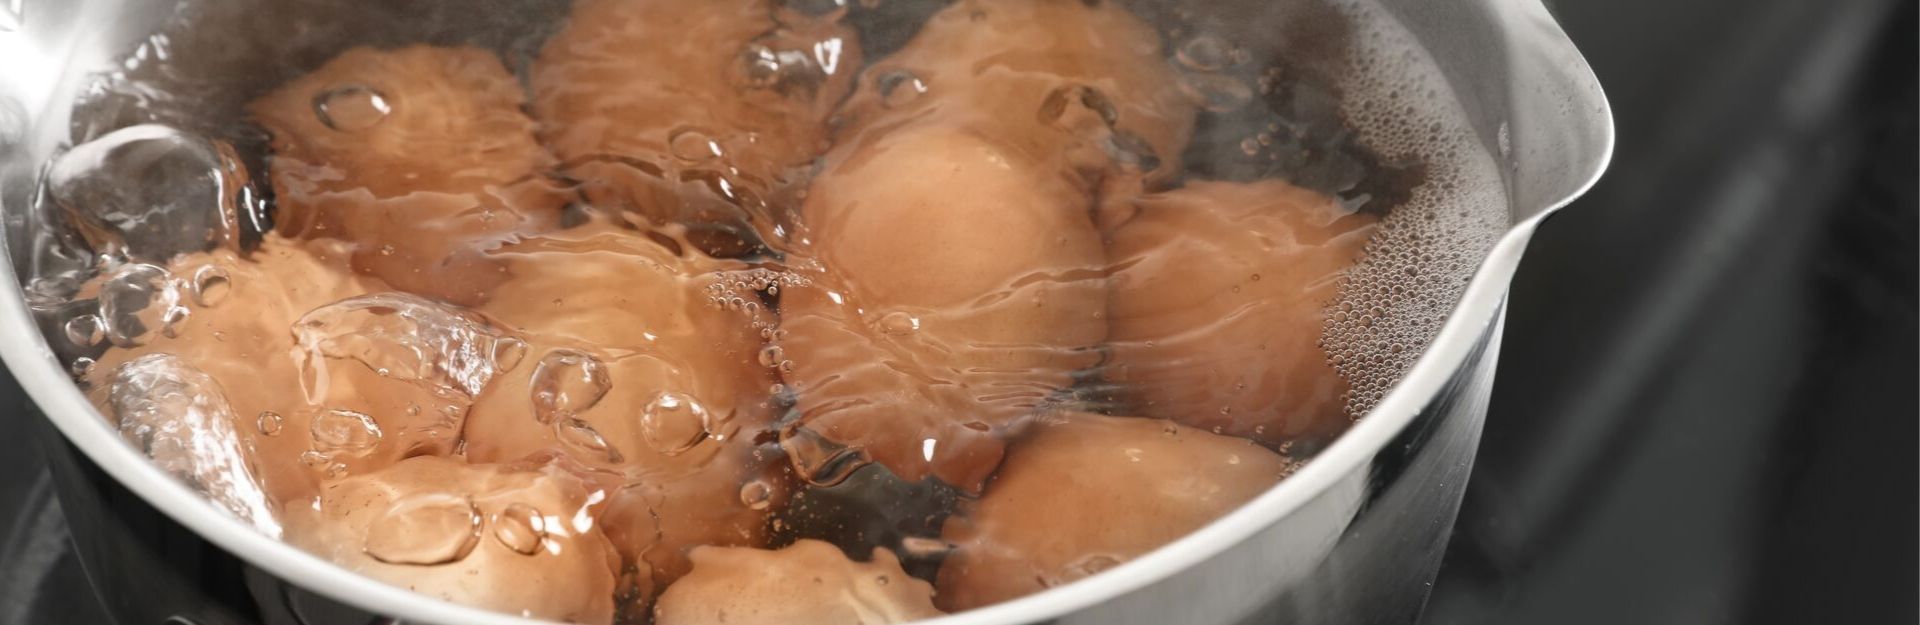 Eggs are being boiled in a pot.